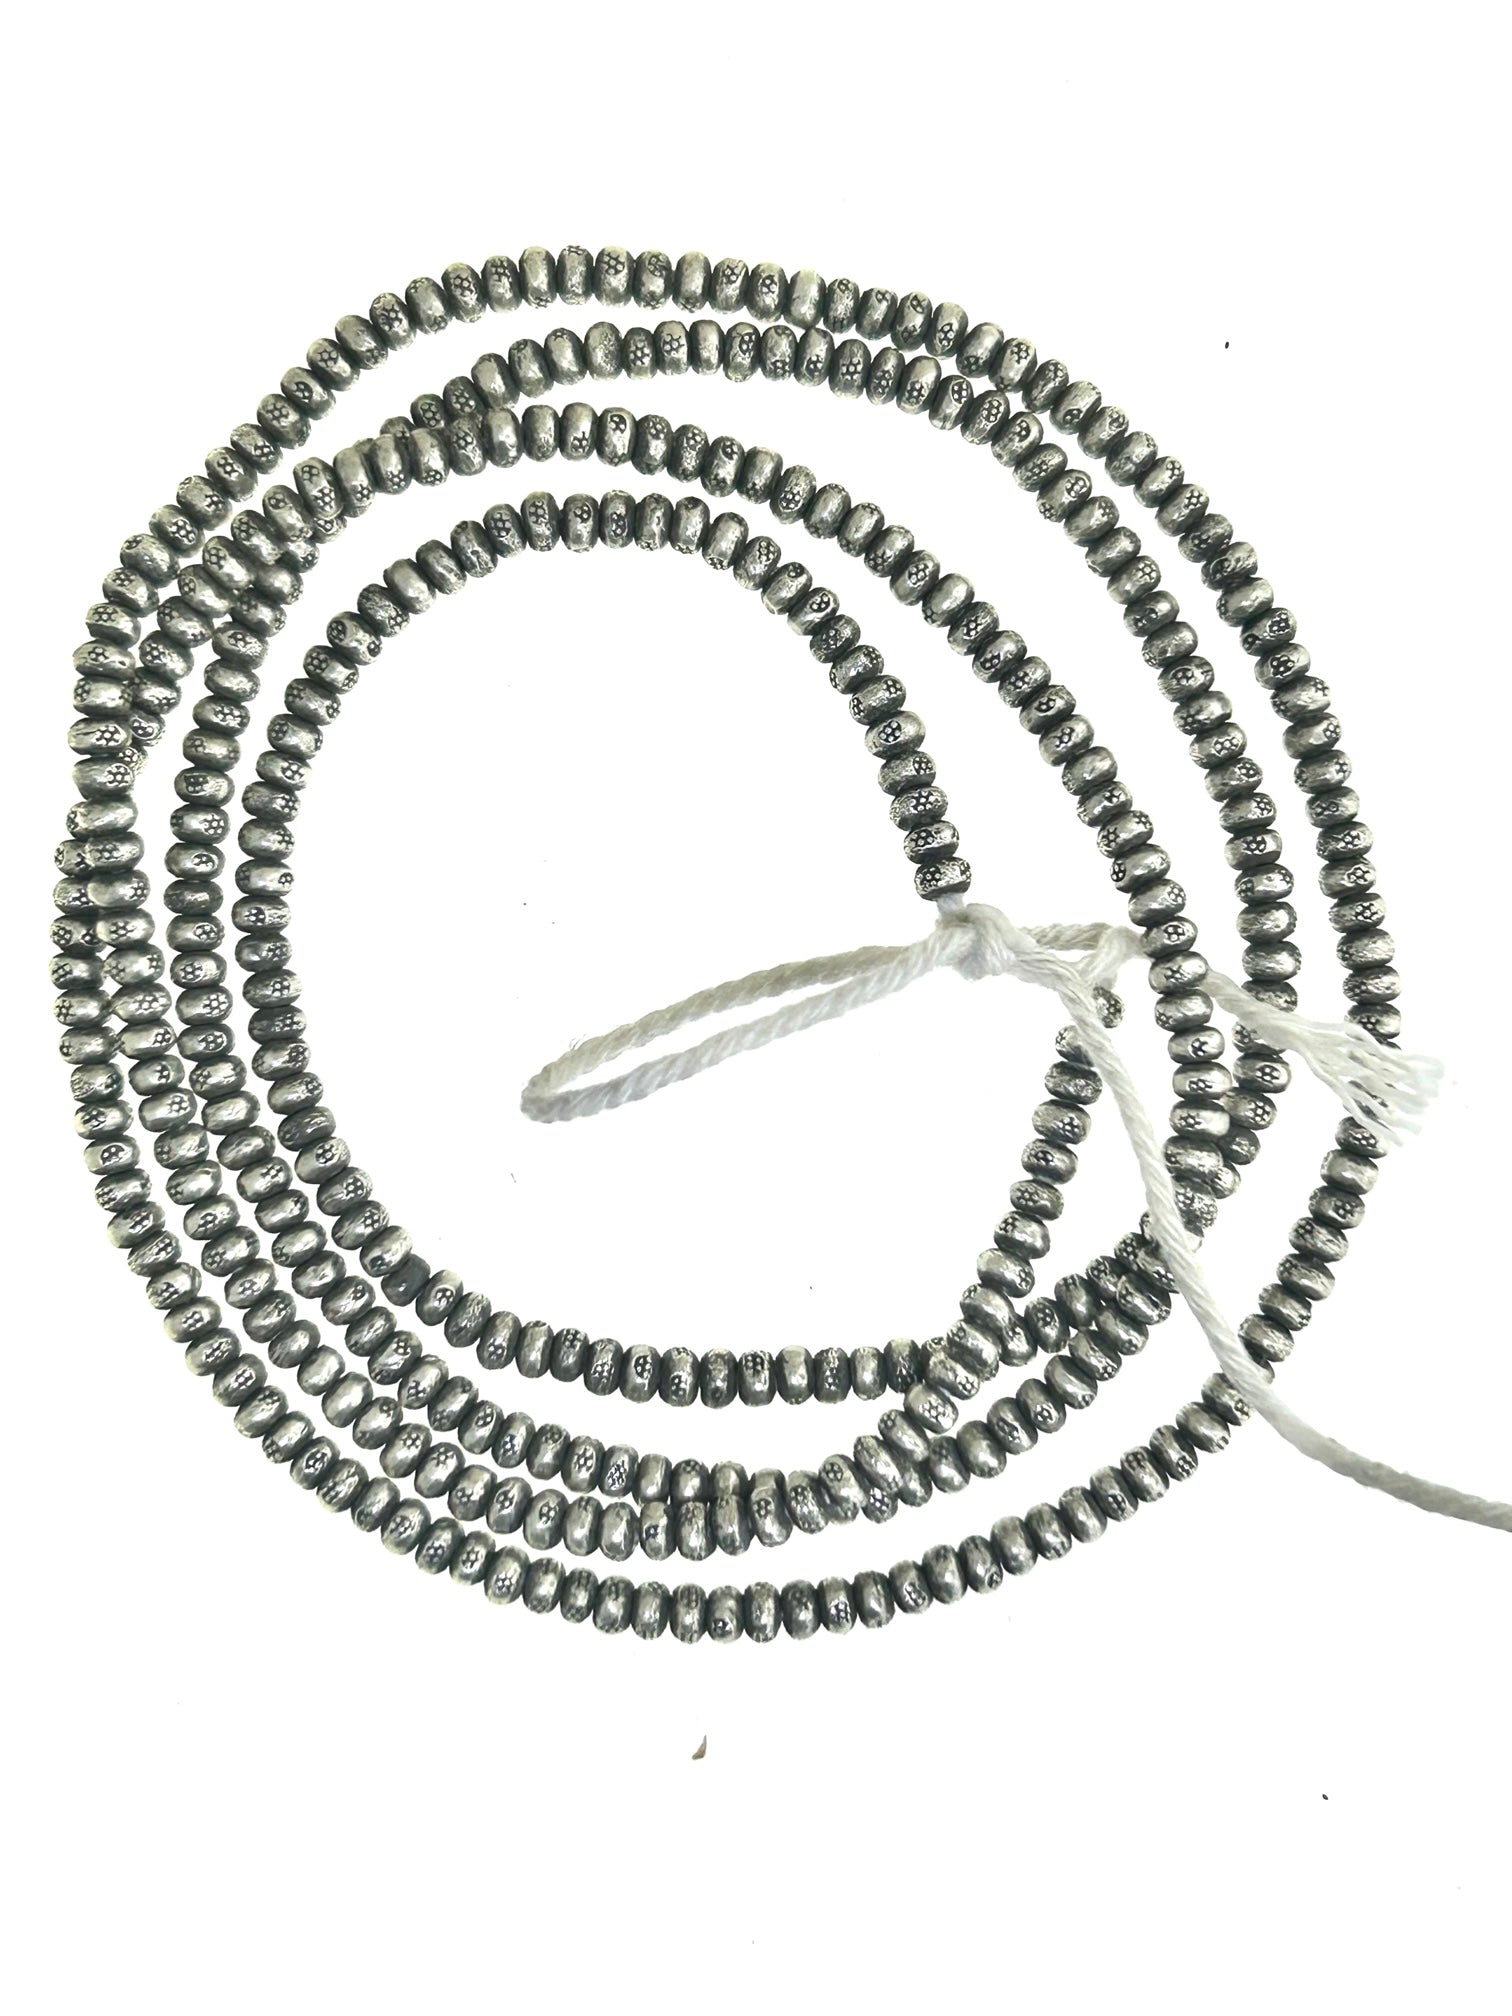 HB1 -  Hill Tribe Silver Bead size 3mm Hole size 1.5 mm